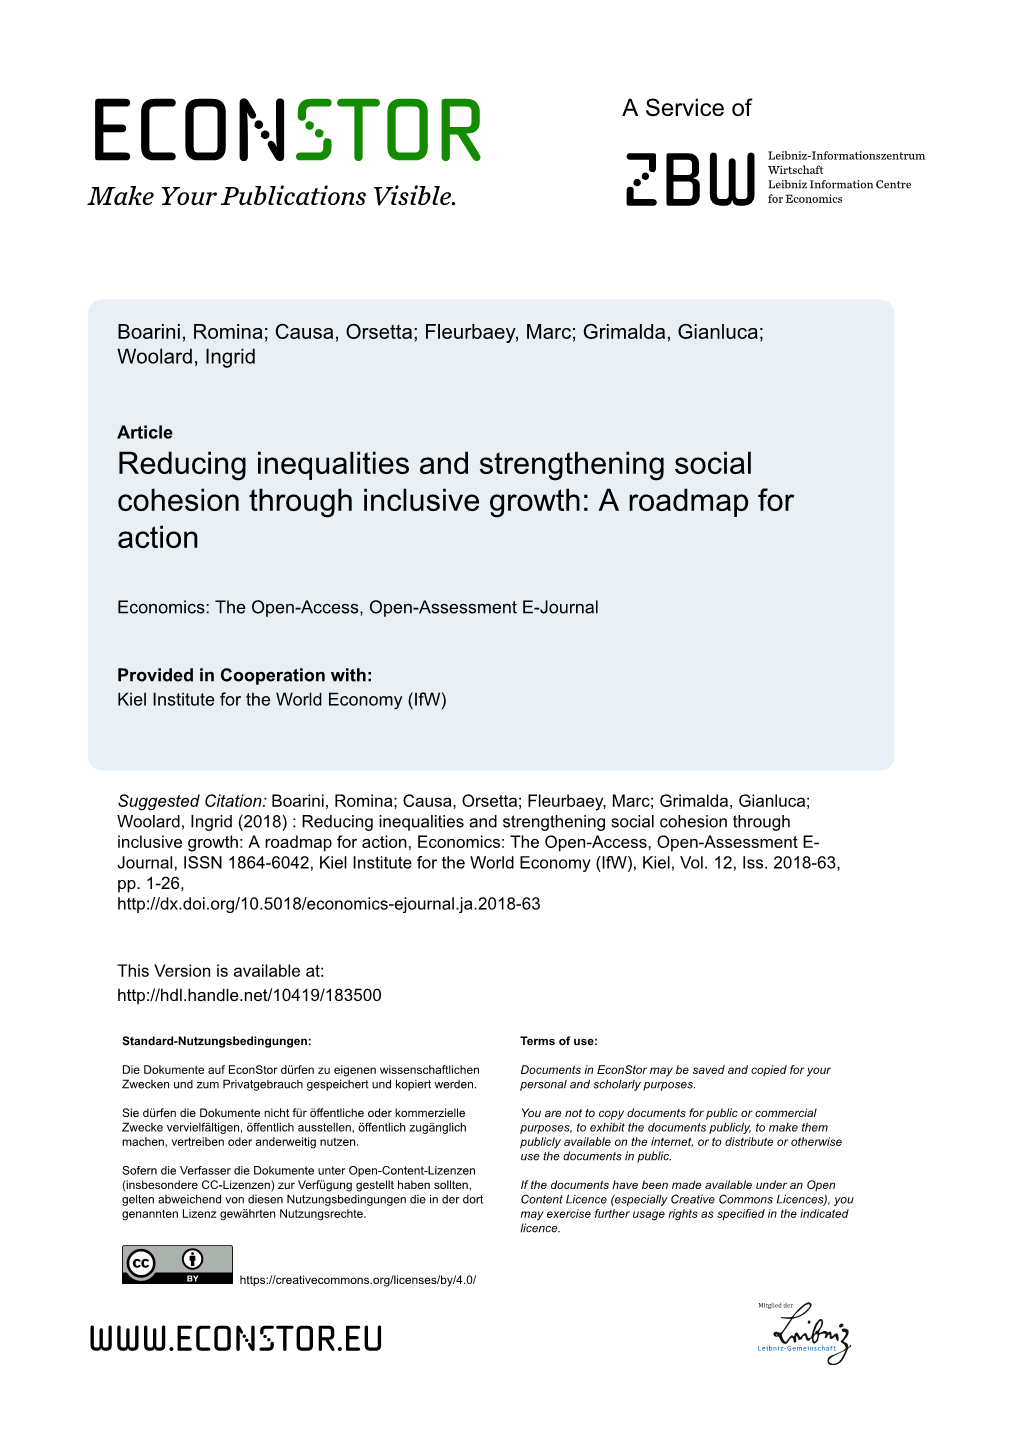 Reducing Inequalities and Strengthening Social Cohesion Through Inclusive Growth: a Roadmap for Action